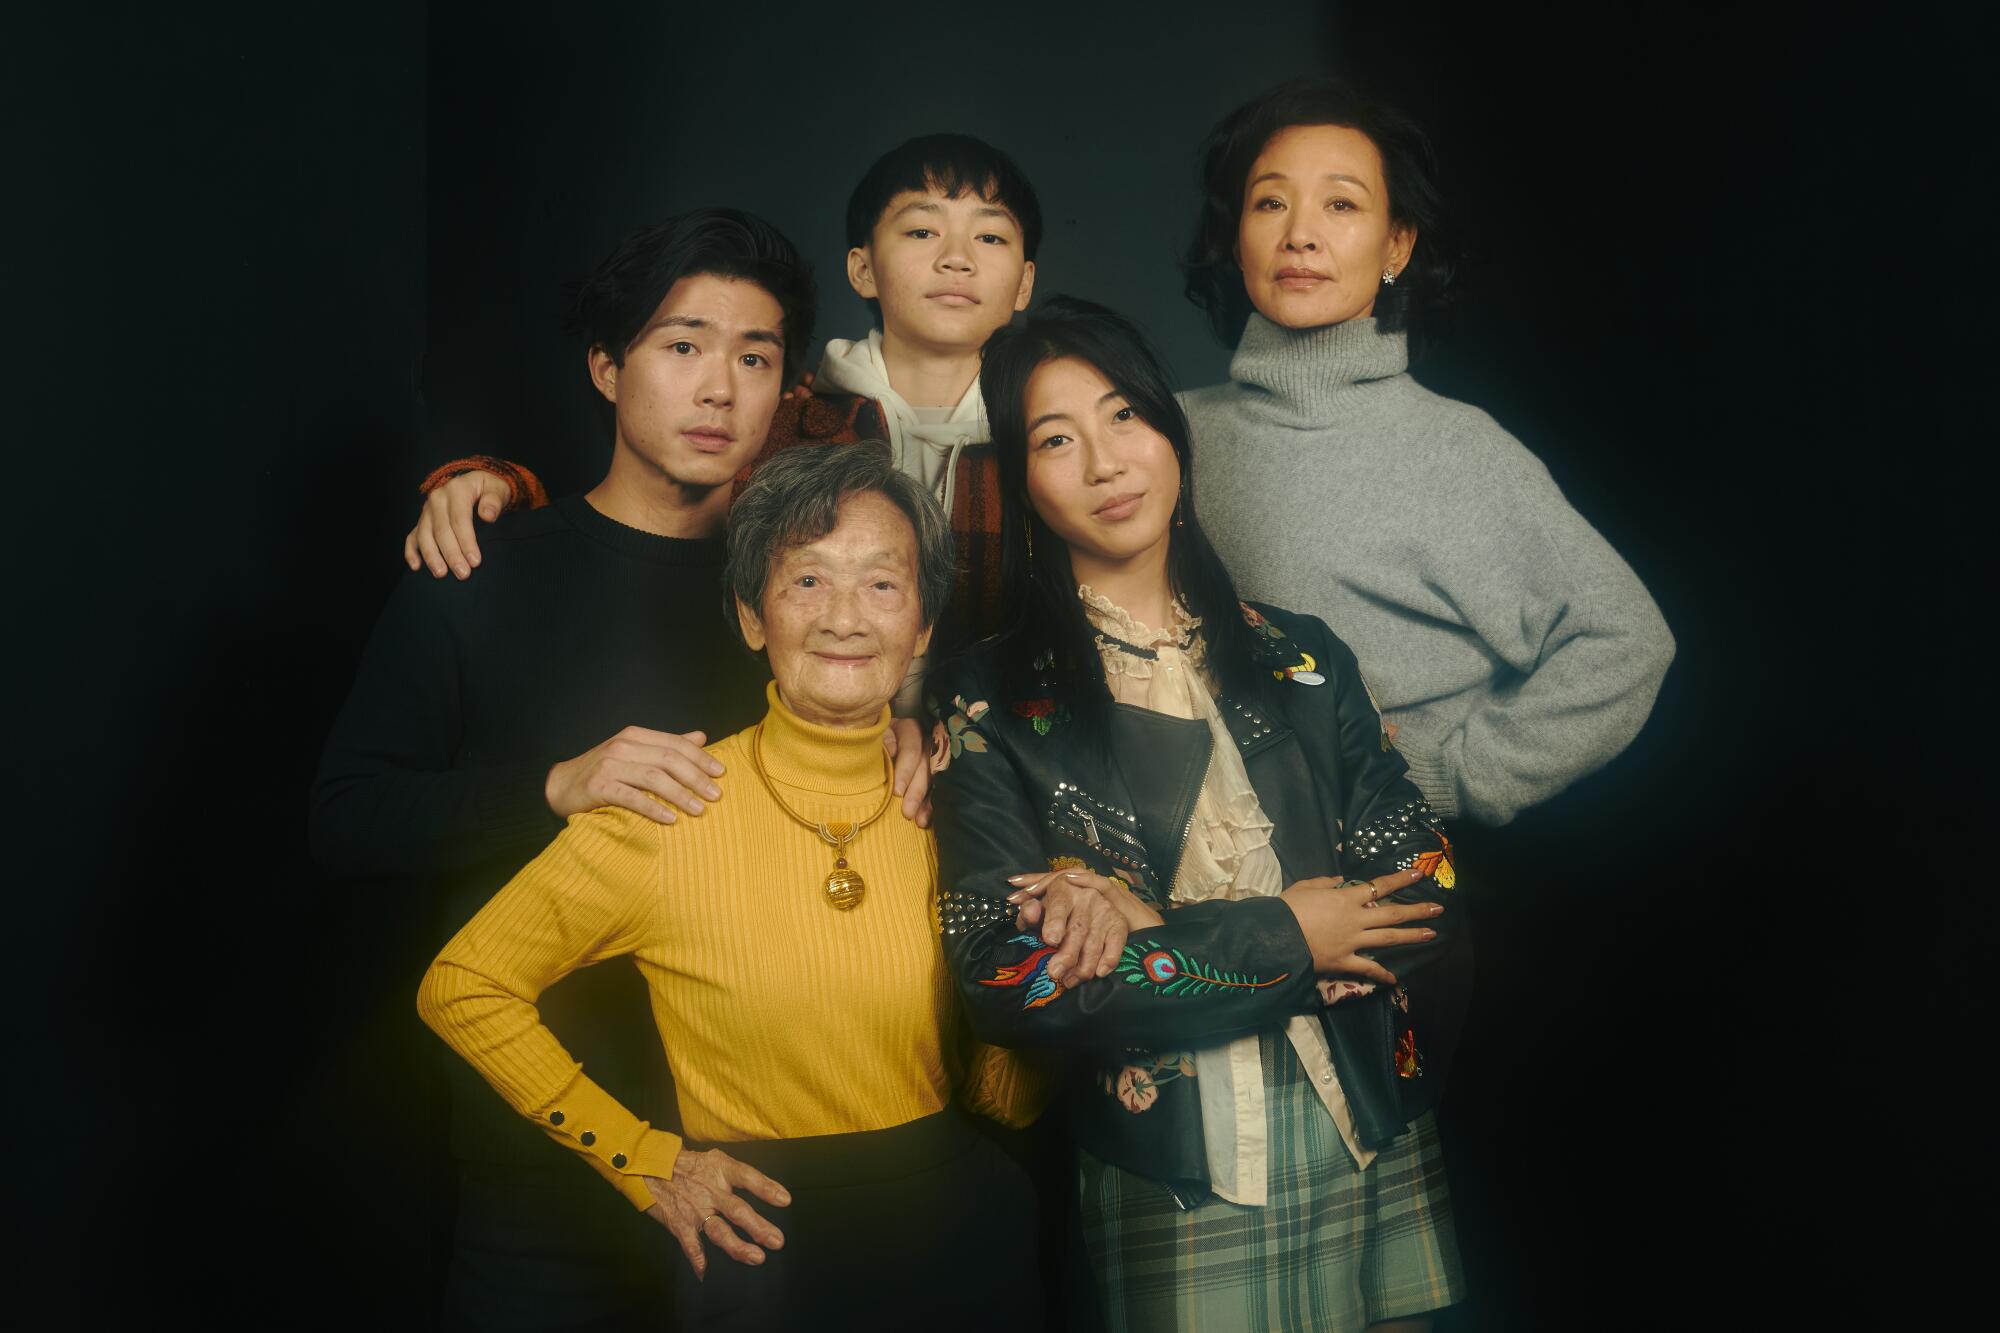 Five people pose for a portrait.